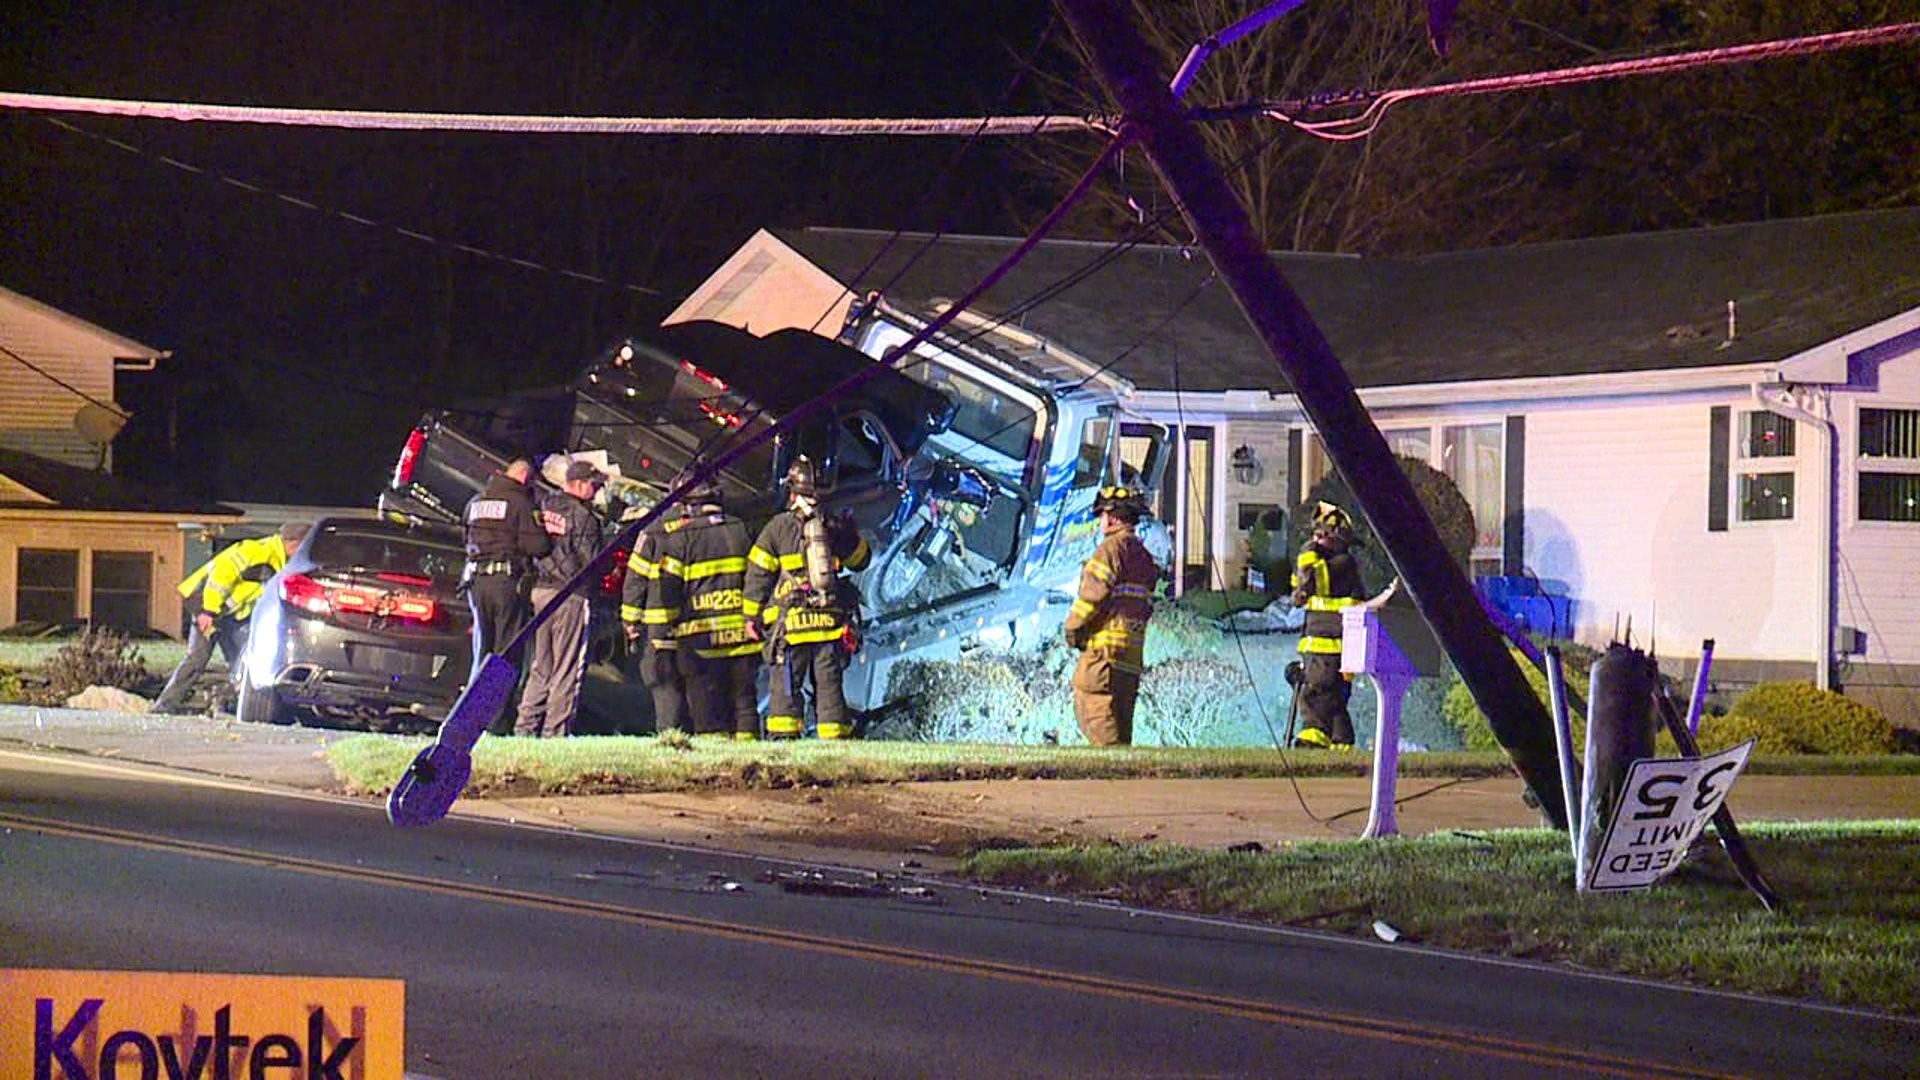 Truck Hauling Two Cars Crashes, Narrowly Missing Home